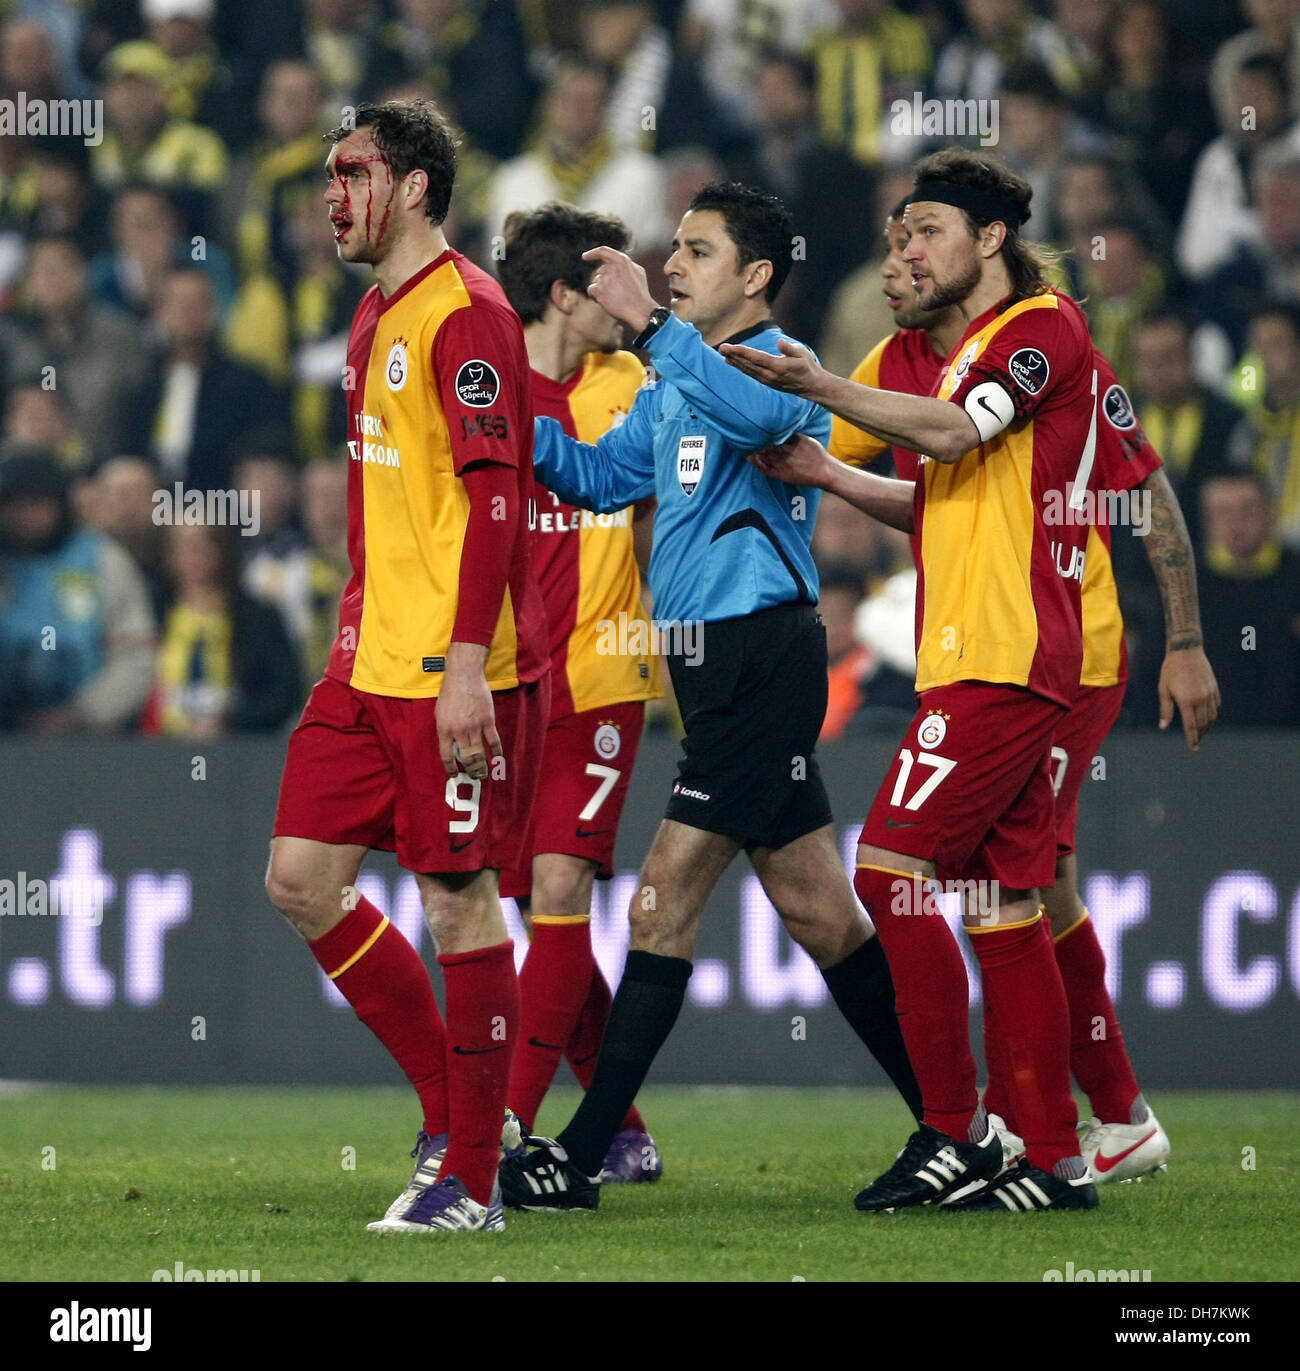 Download Fenerbahce Vs Galatasaray Pictures